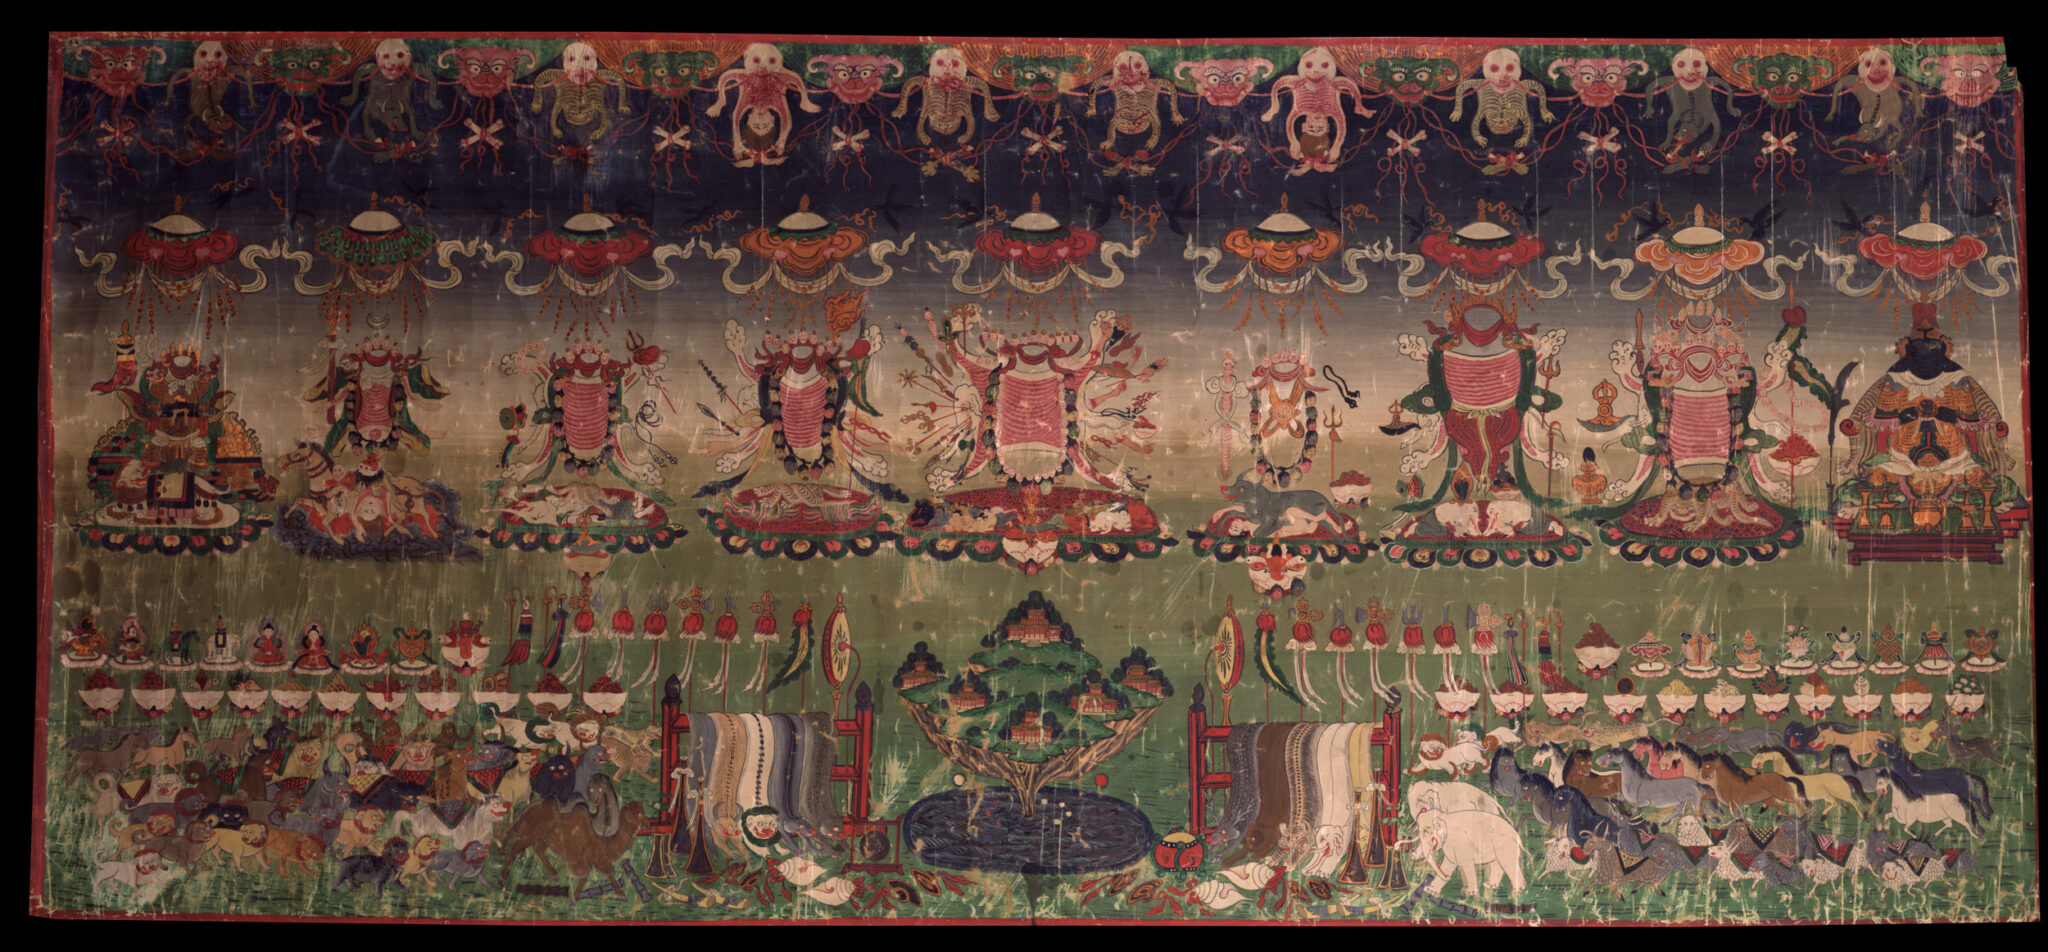 Painting depicting nine deities hovering in row above riders assembled on horseback in green landscape